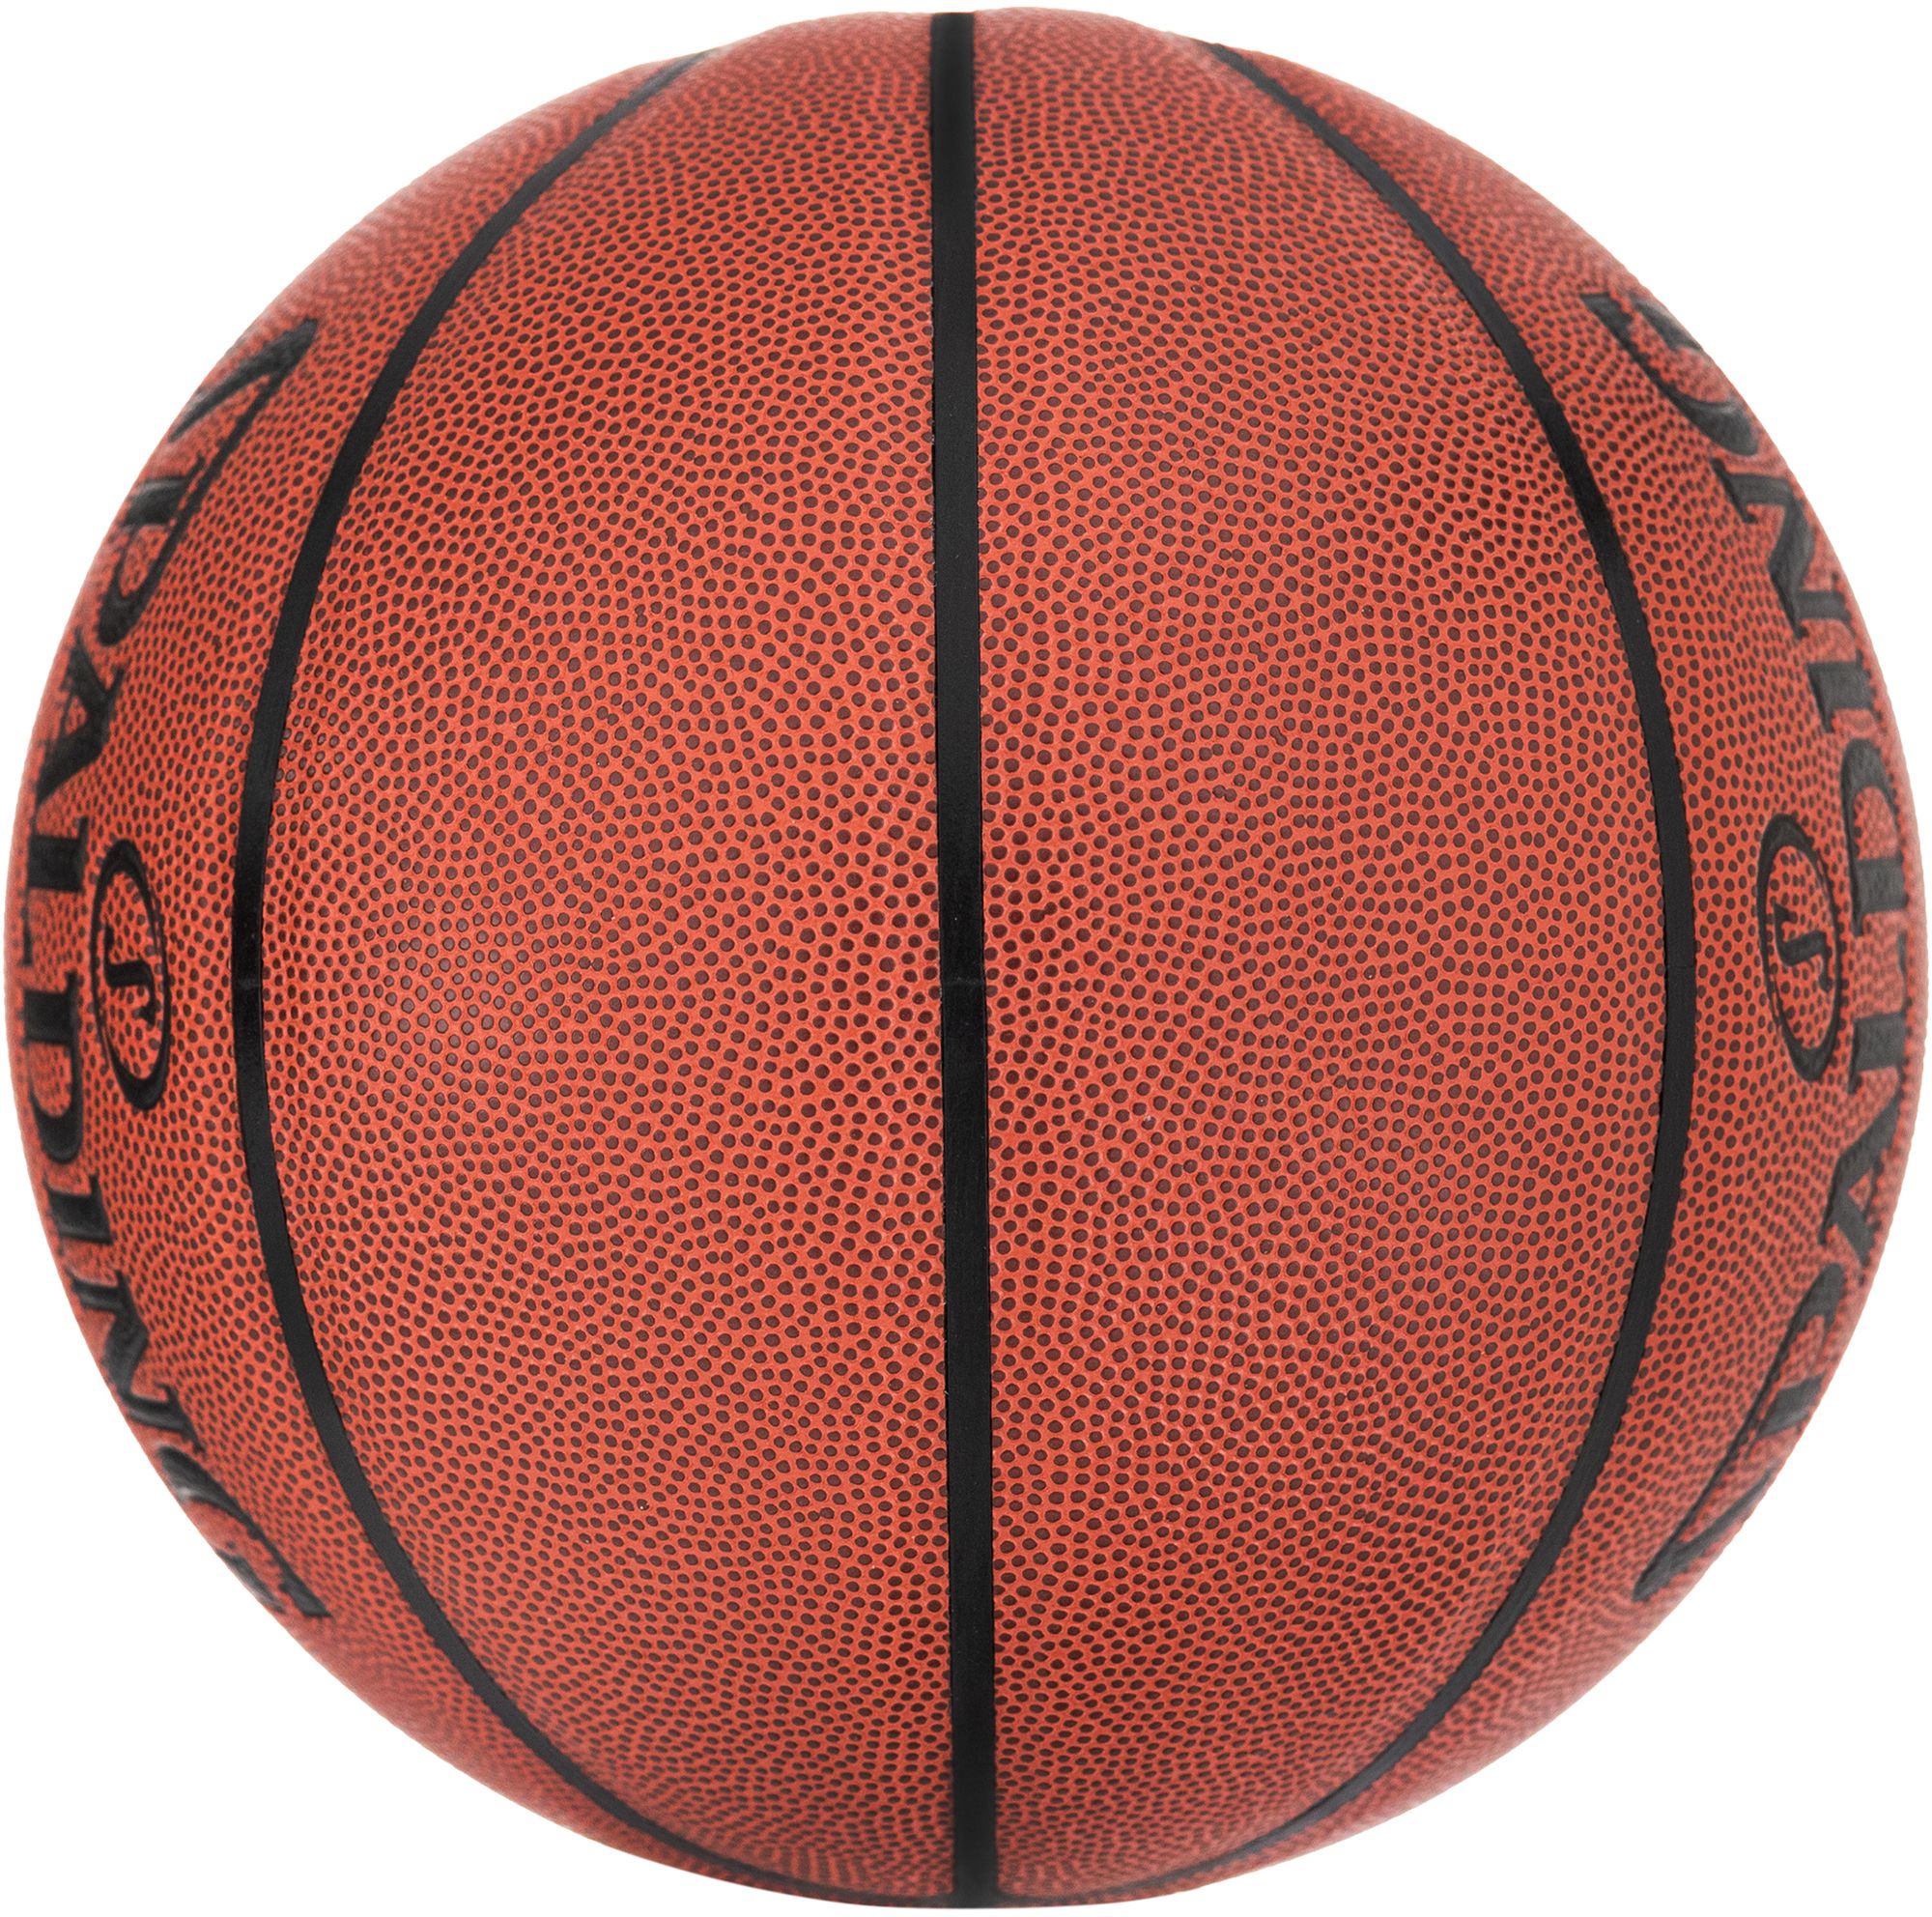 Spalding TF-Trainer Weighted Basketball